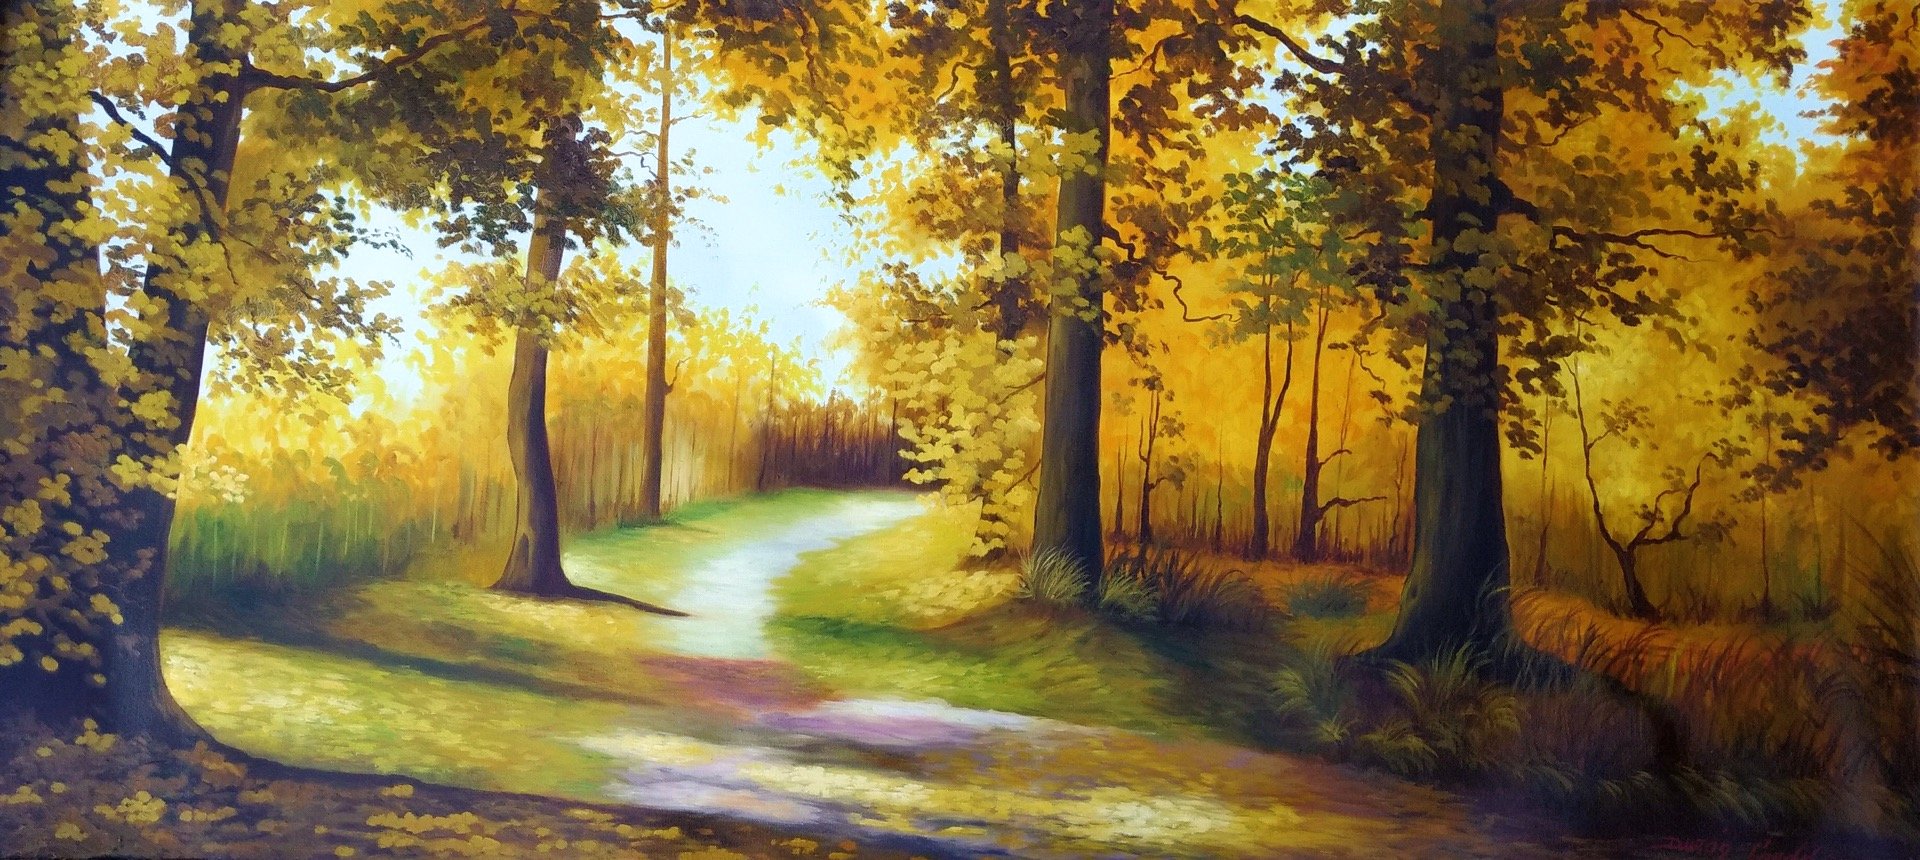 Original Oil Painting on Canvas depicting an autumnal road.